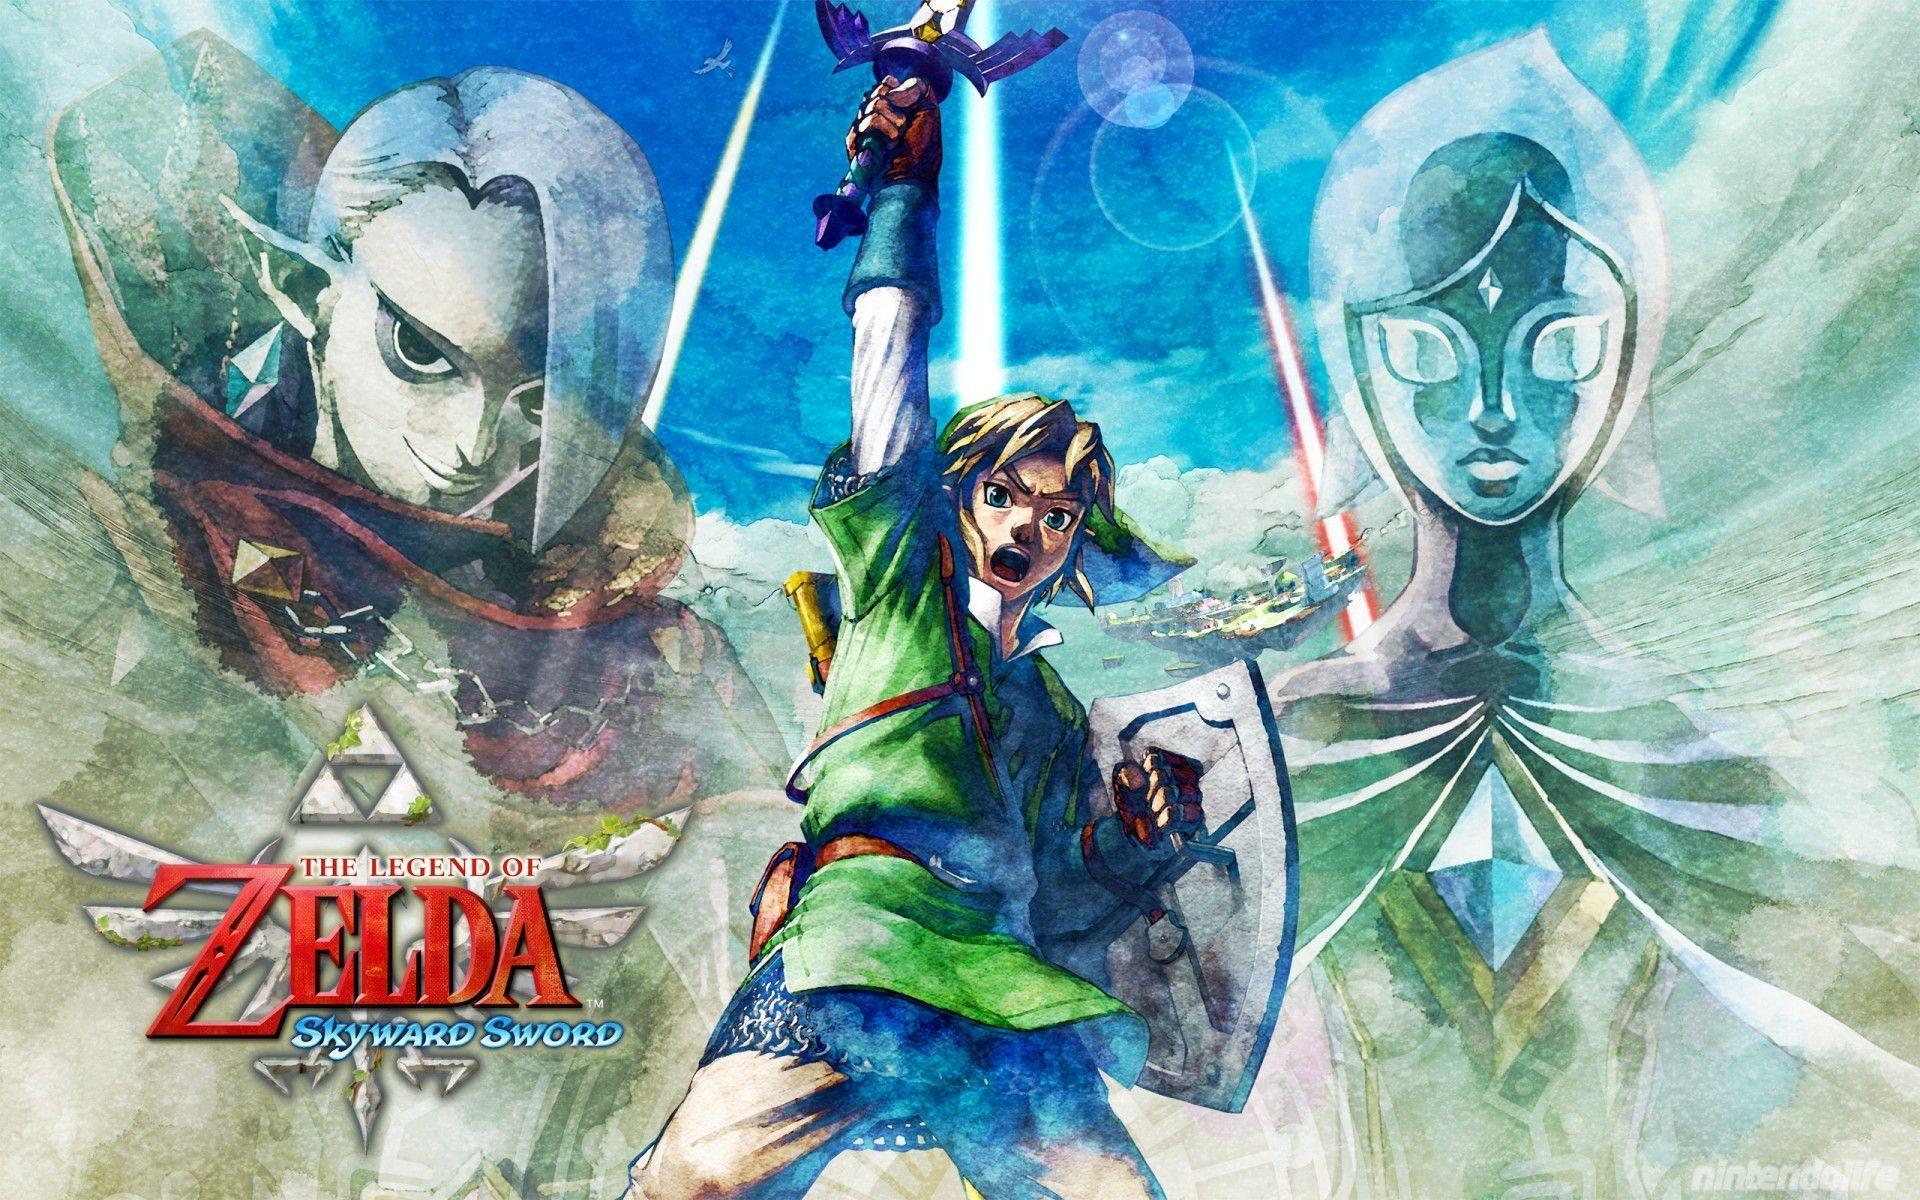 Out Today: The Legend of Zelda: Skyward Sword and Wallpaper